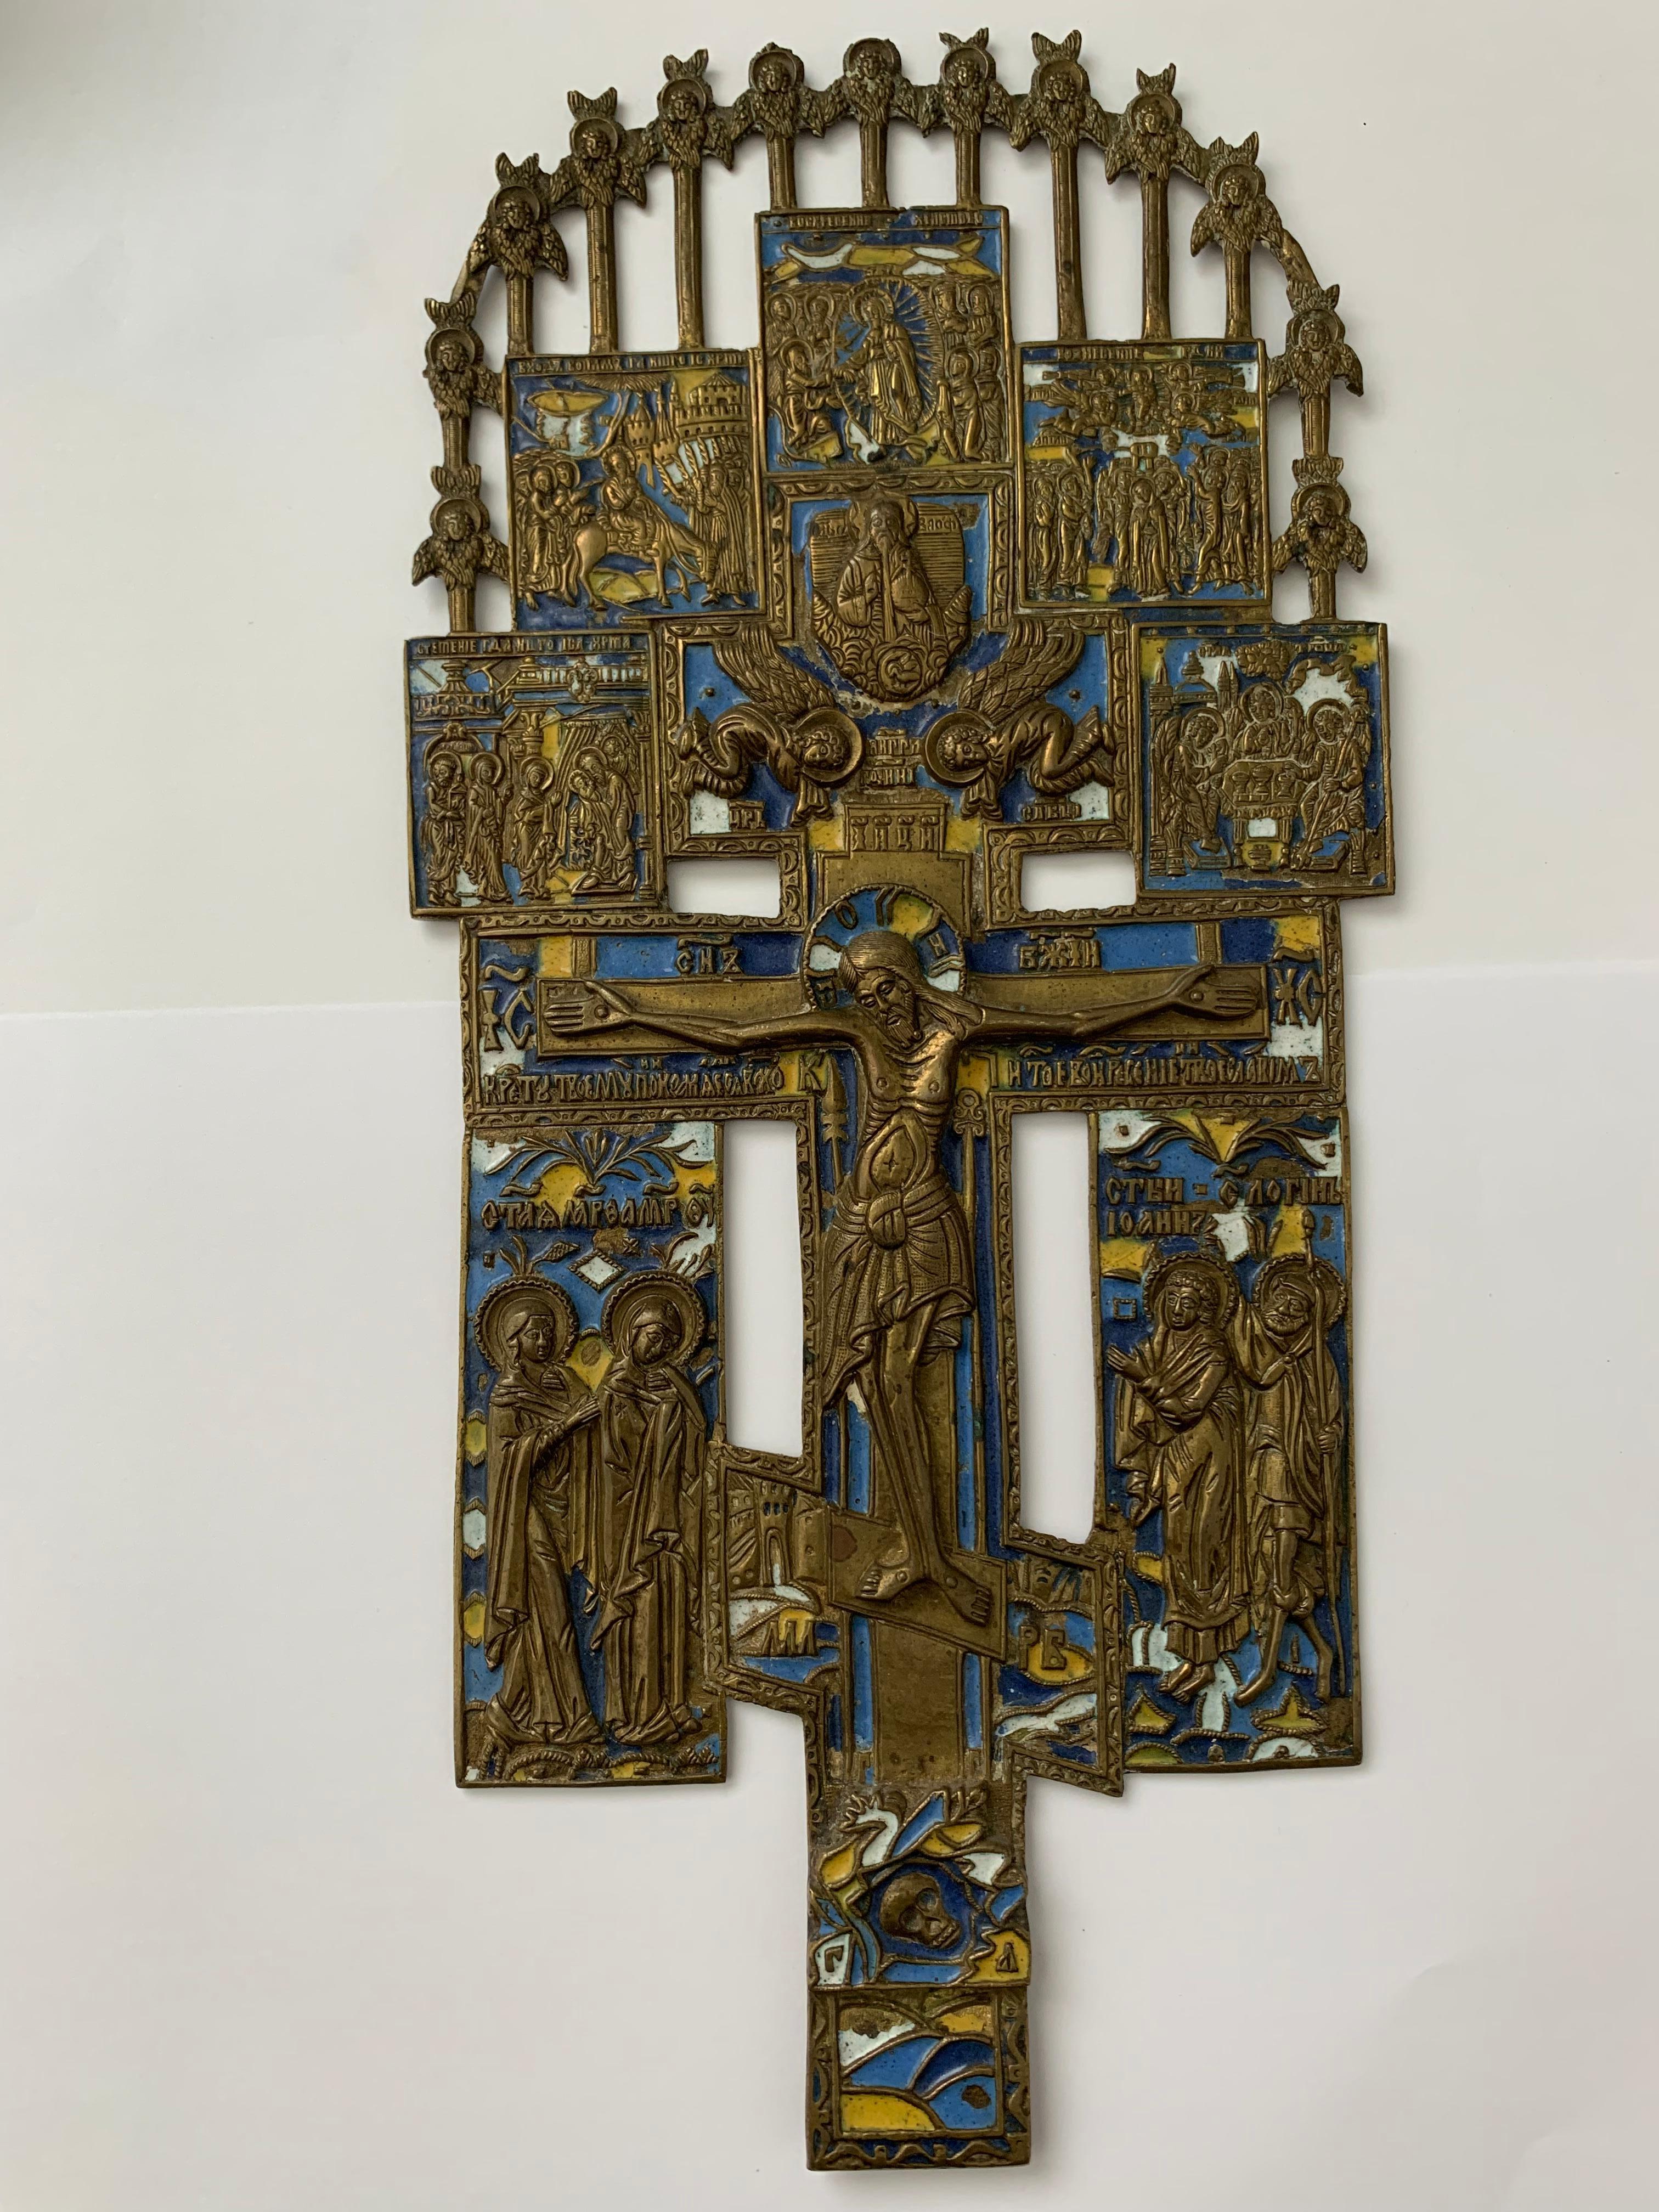 Wall or home cross.
Russian orthodox bronze and enamel cross.
Scene with Martha, Maria, Johannes, and Longinus underneath the cross and above the skull of Adam (symbol of overcoming death after the original sin)
Above god sabaoth between two